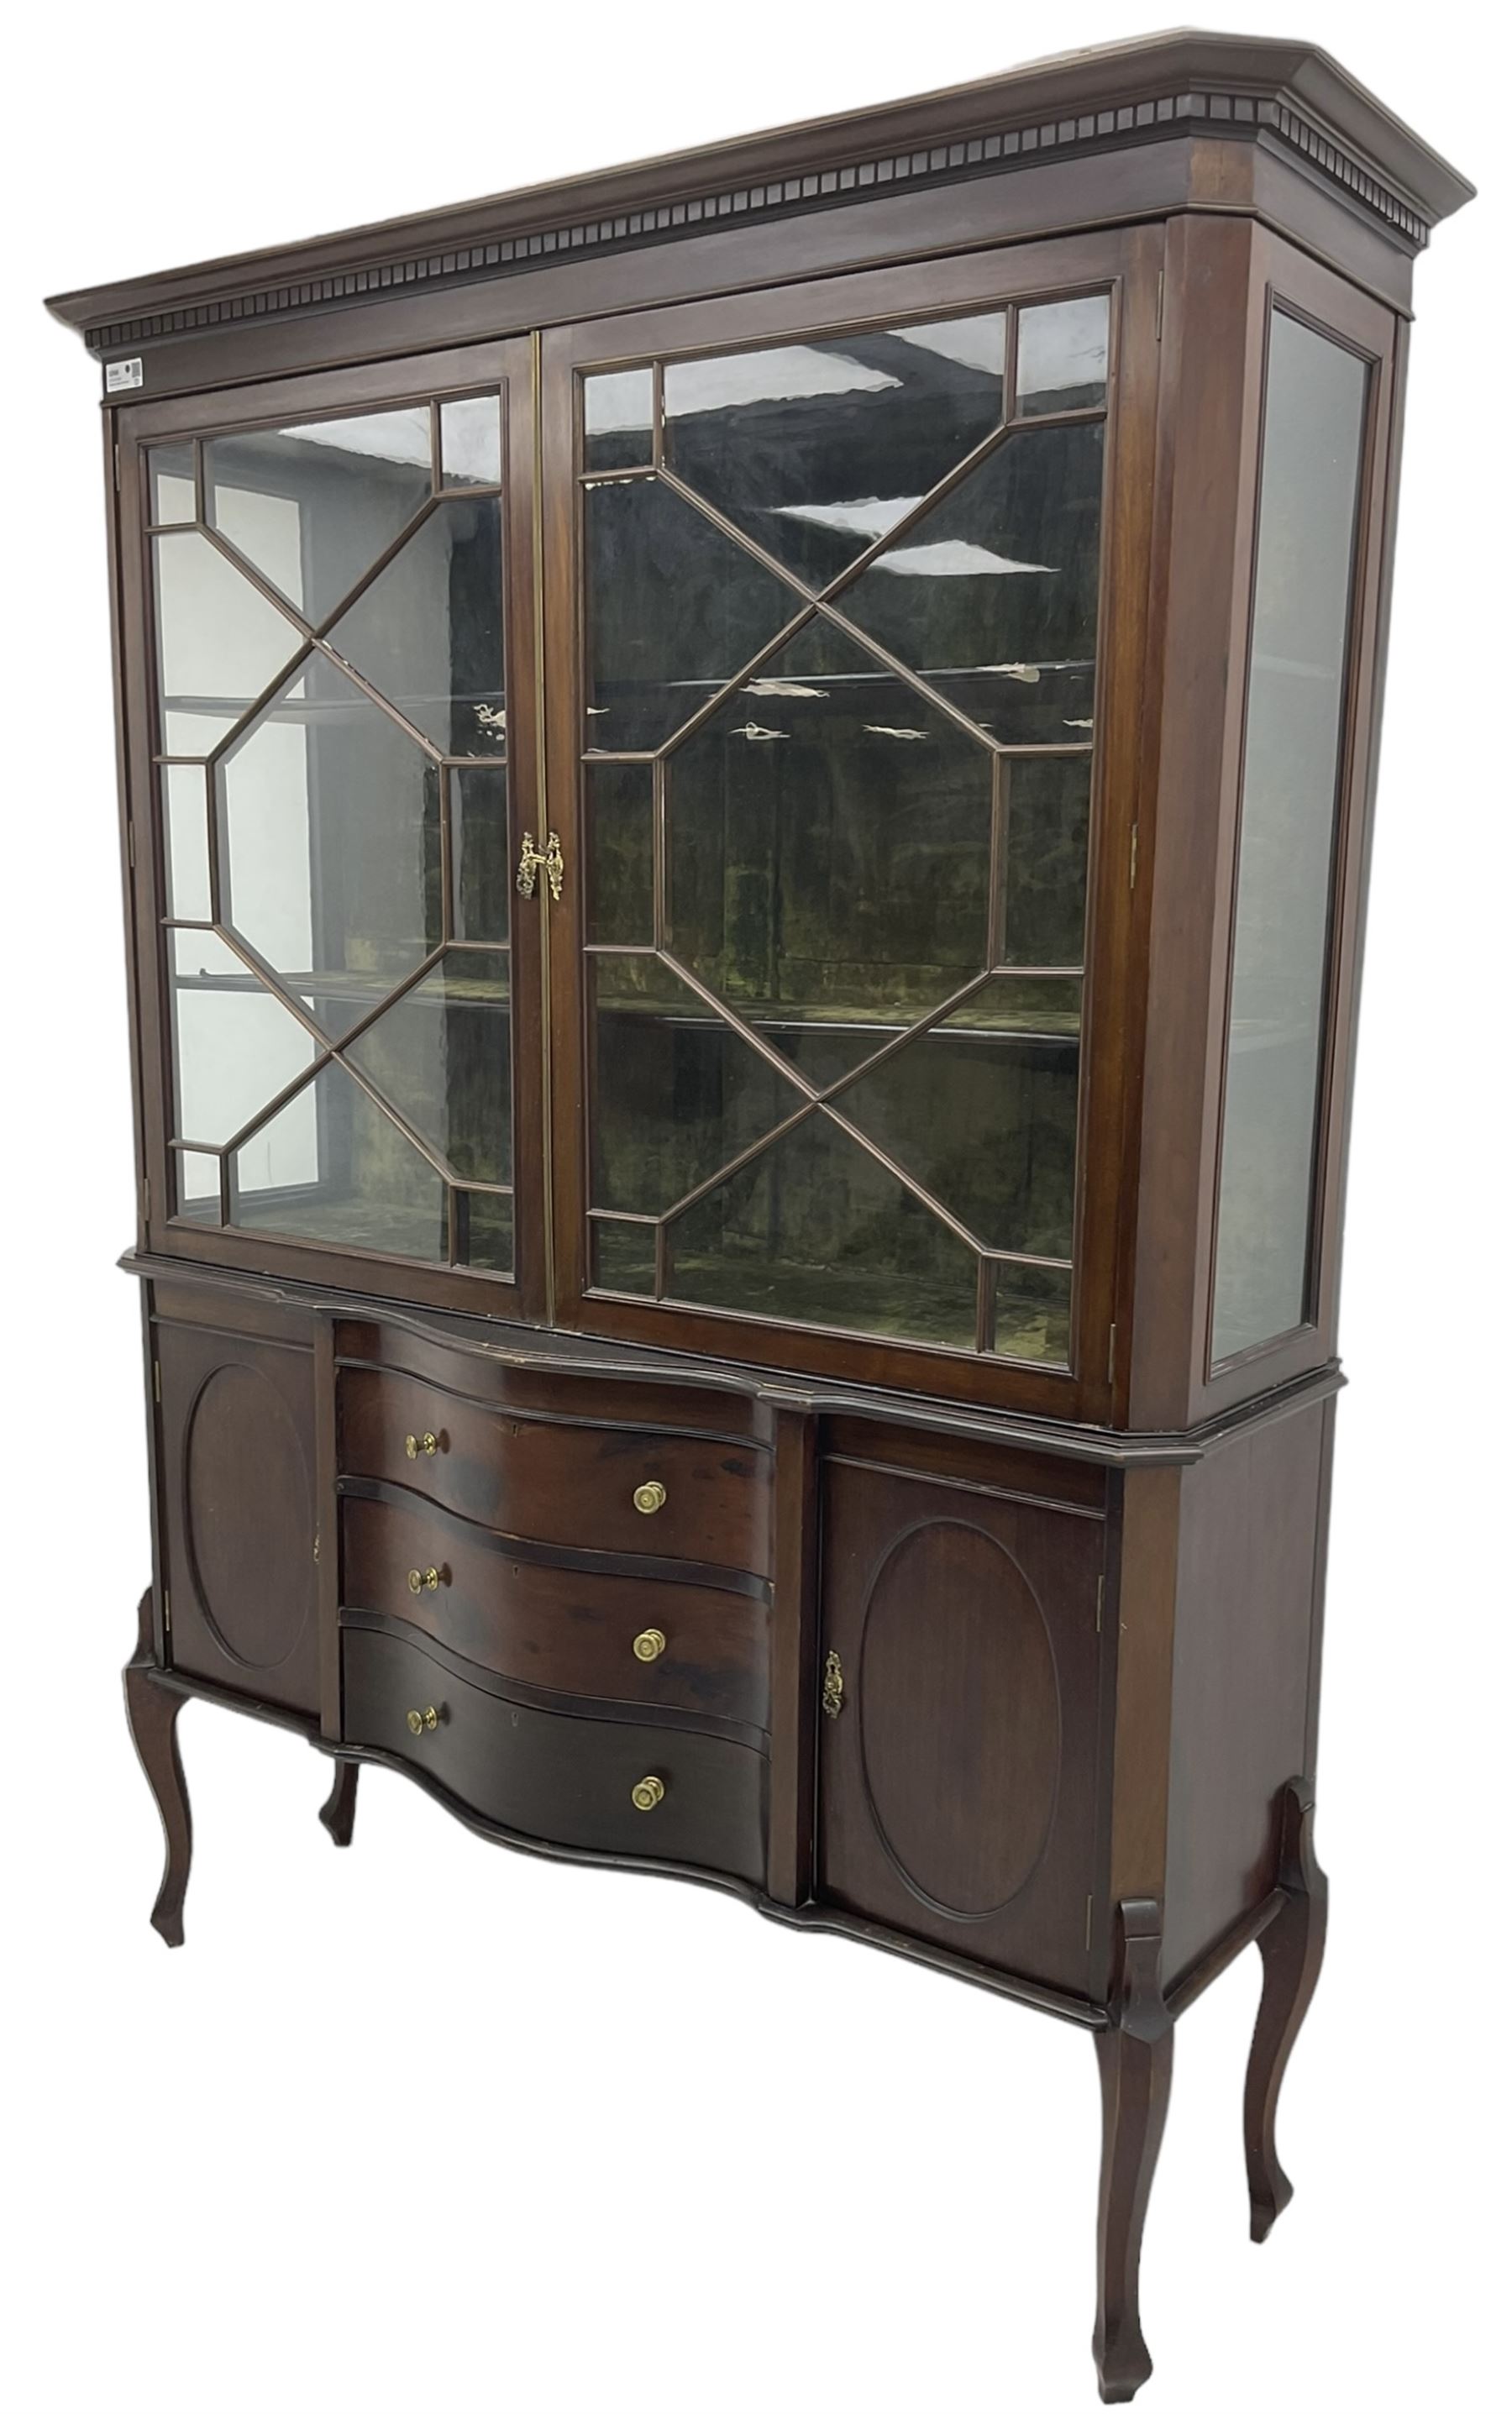 Late 19th century mahogany display cabinet on stand - Image 3 of 7